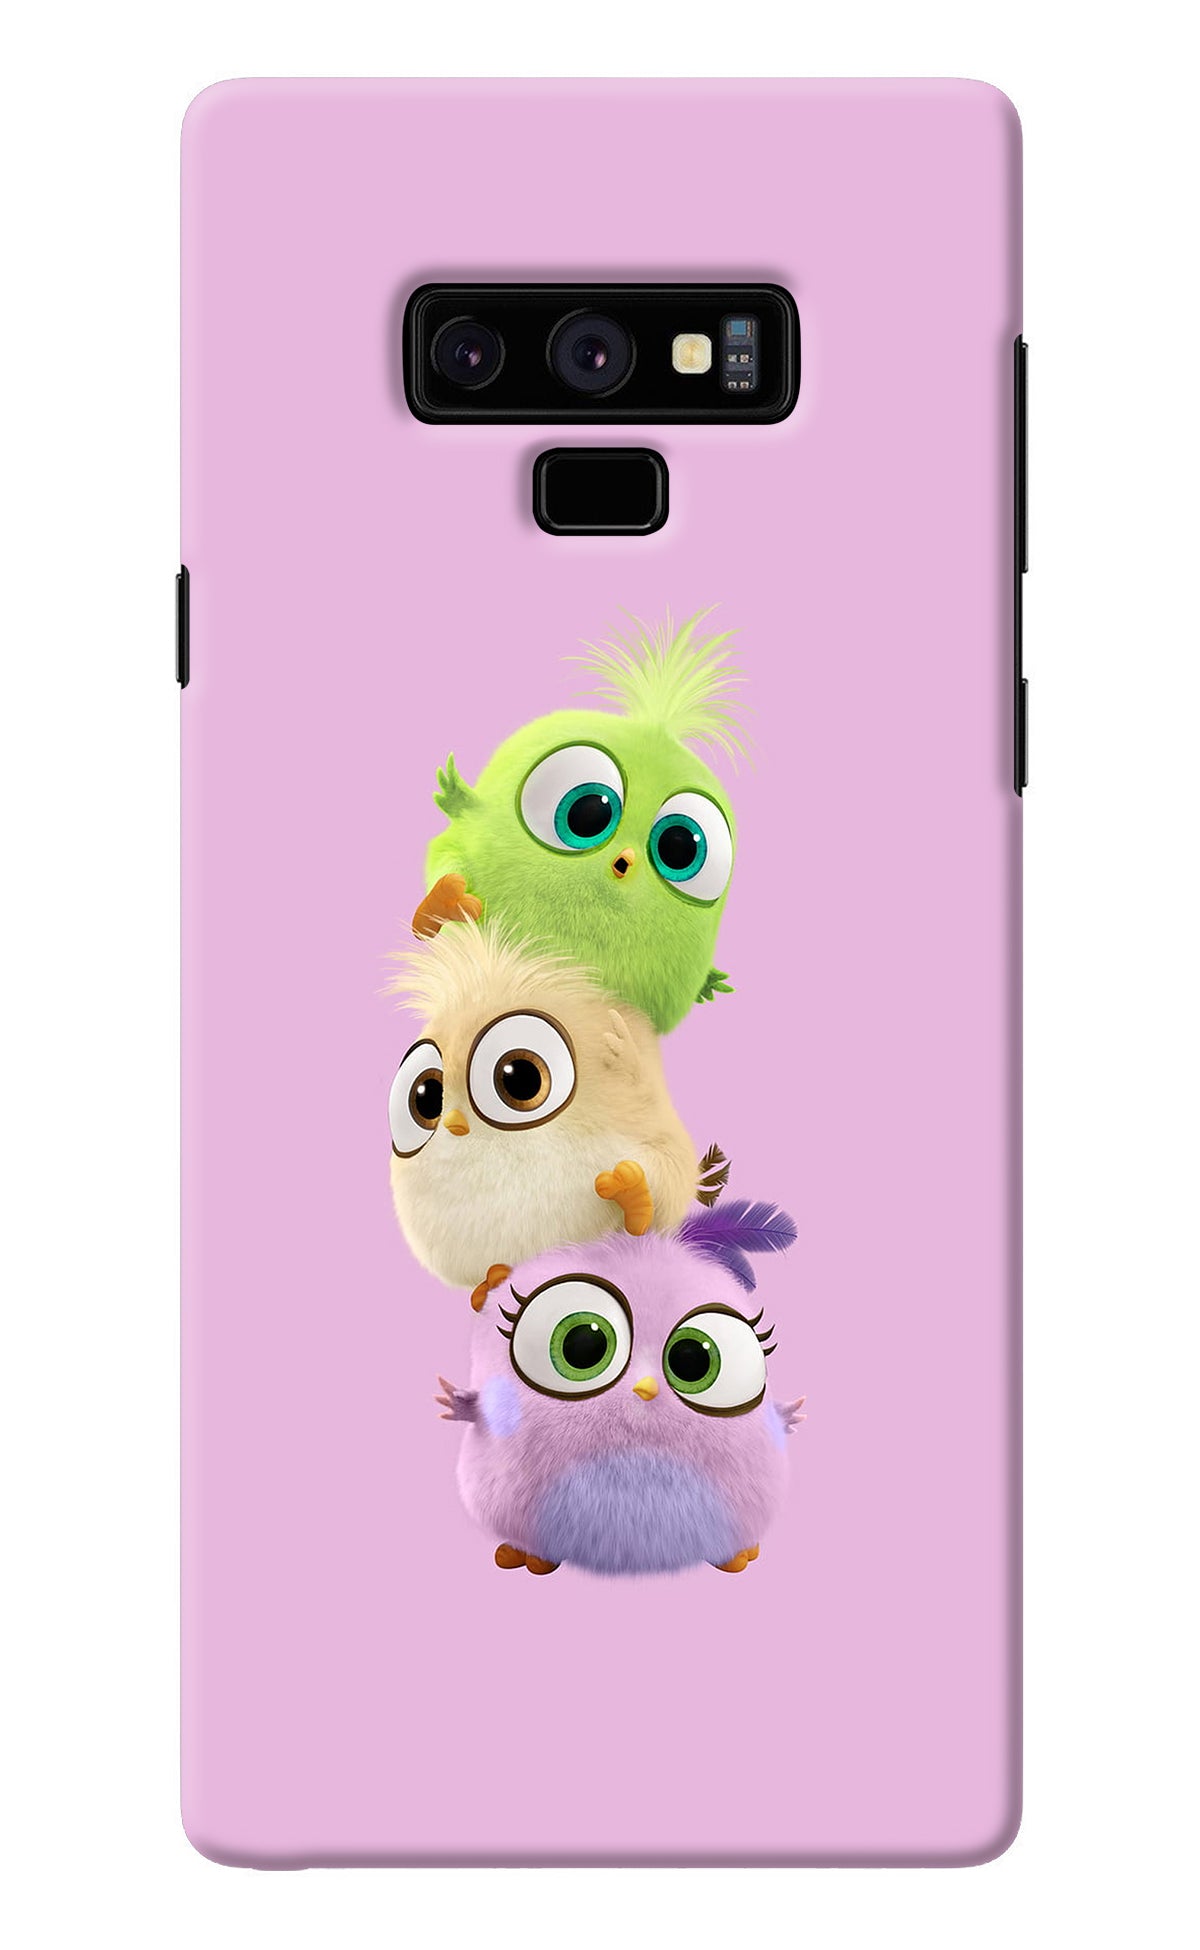 Cute Little Birds Samsung Note 9 Back Cover